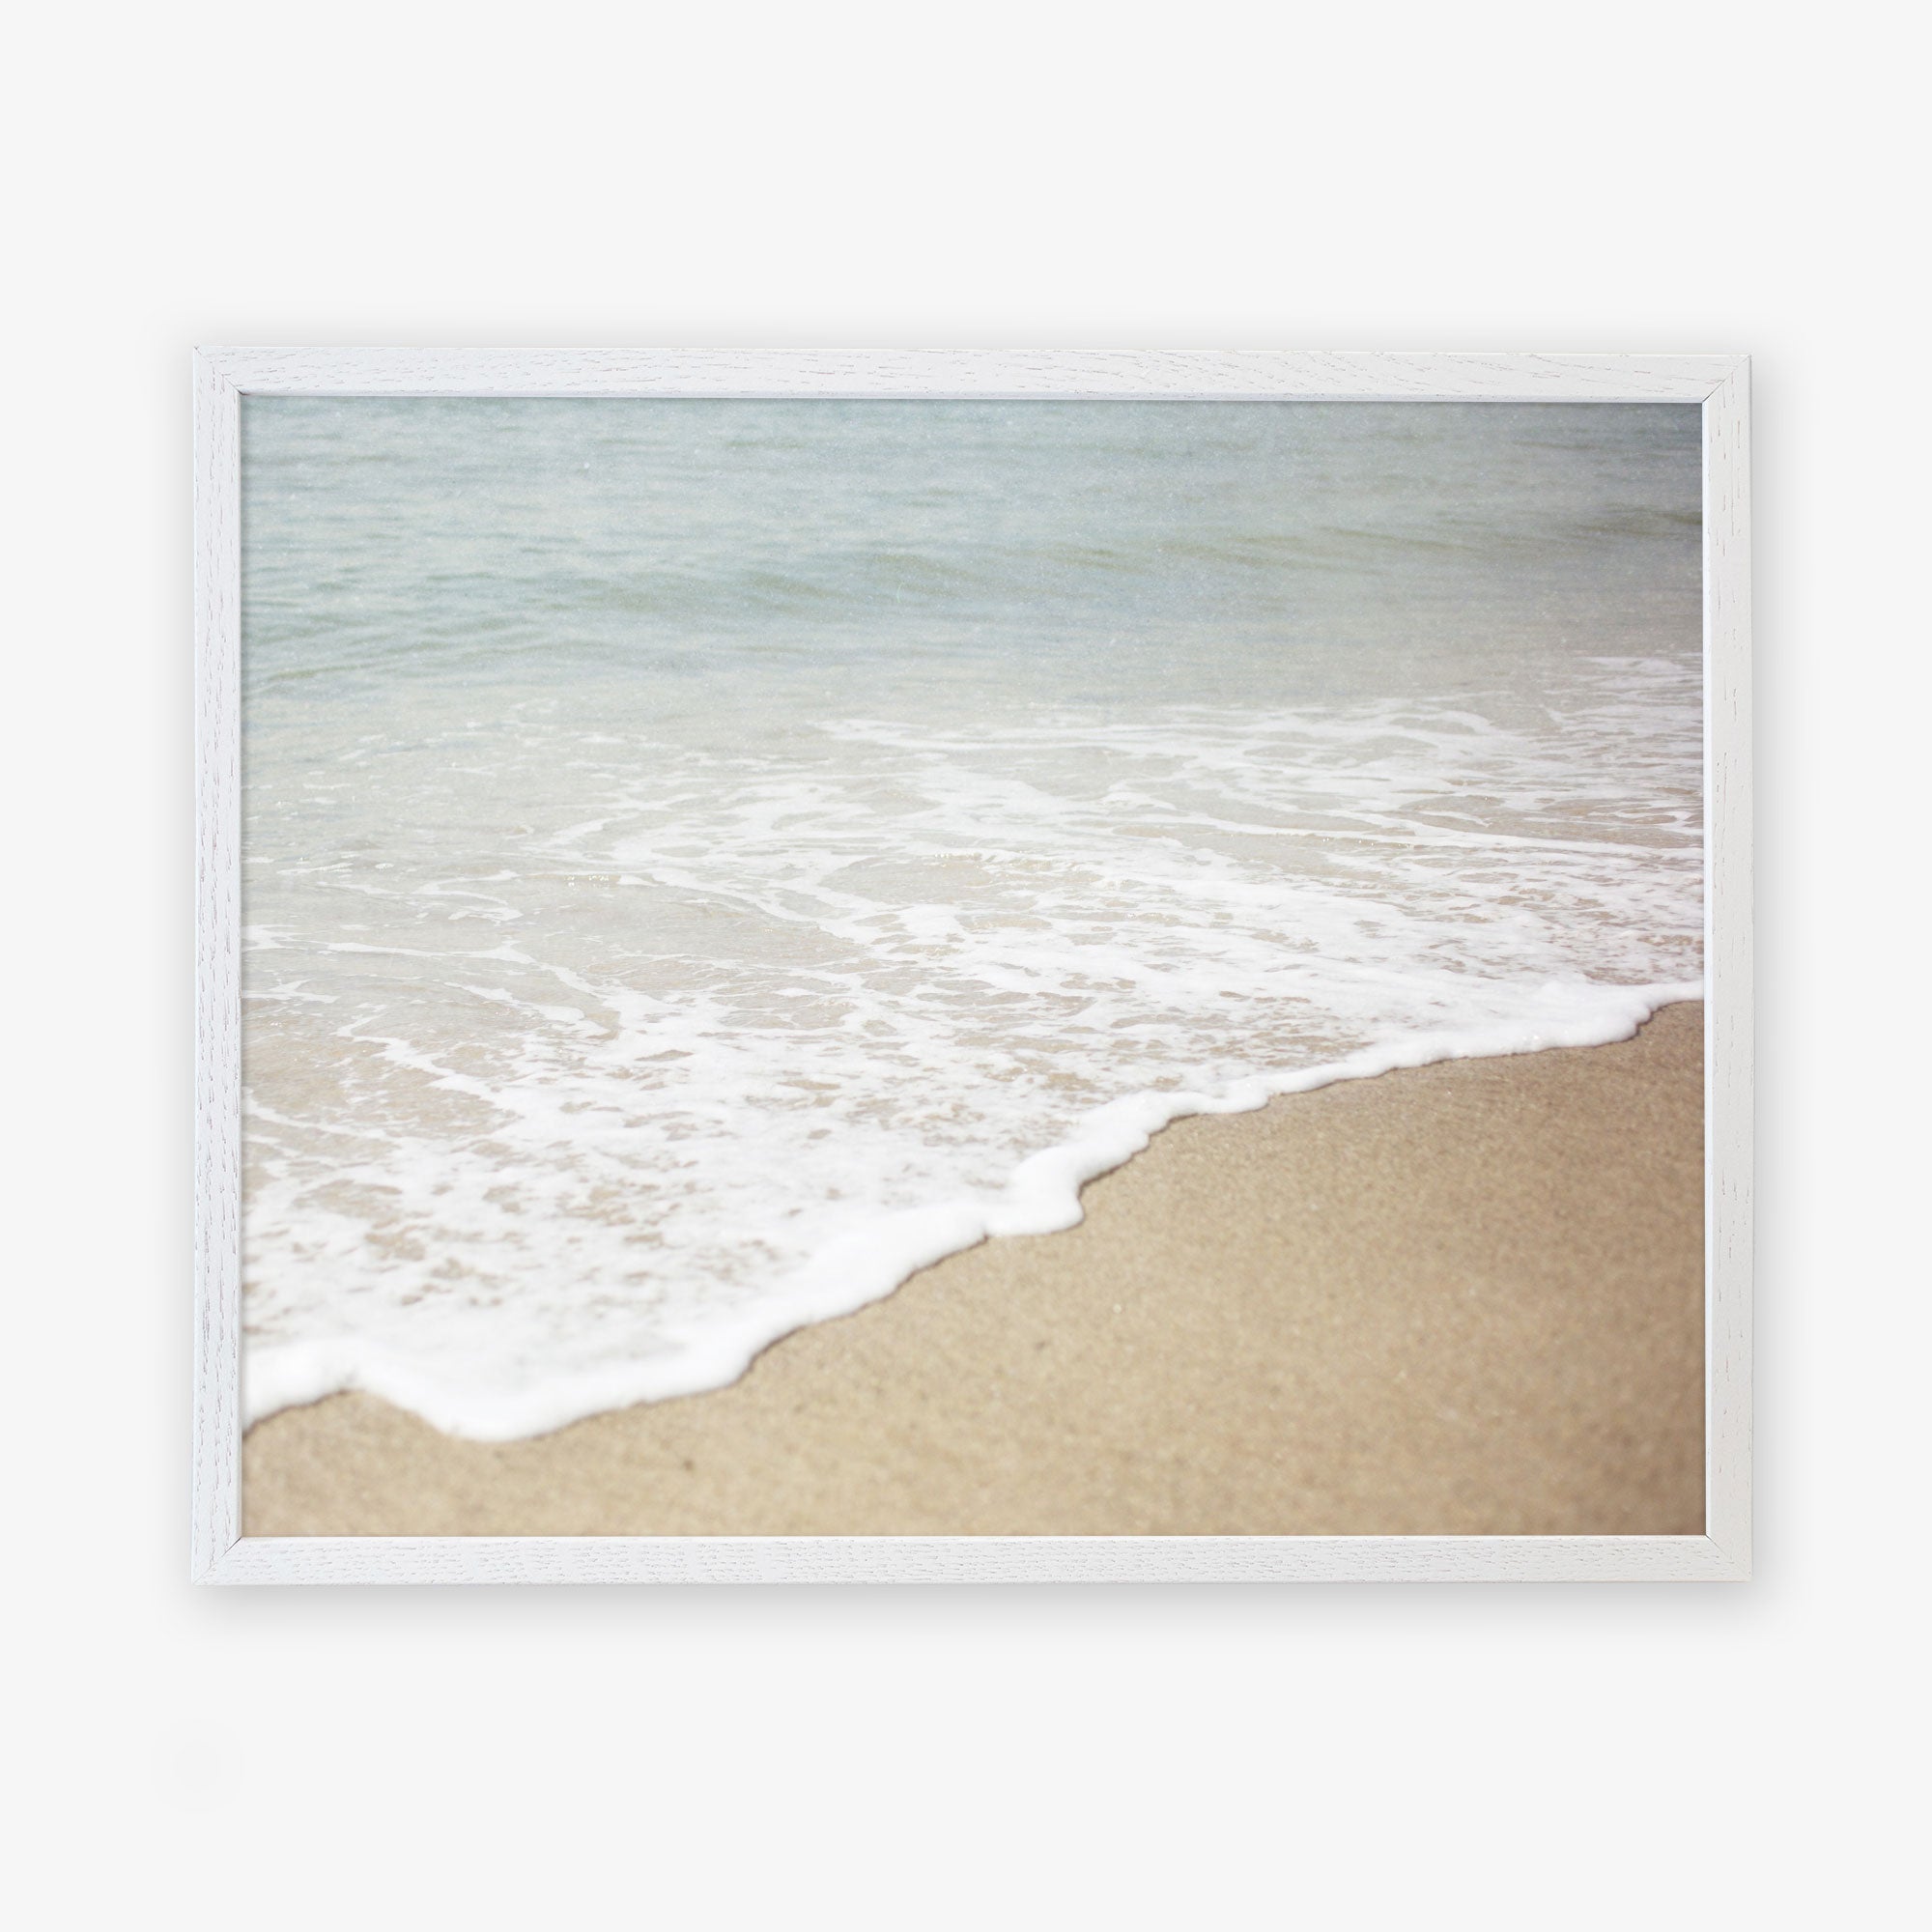 Framed photograph of a Beach Waves Print, &#39;Chasing Surf&#39;, capturing a tranquil seaside scene on a California beach by Offley Green.